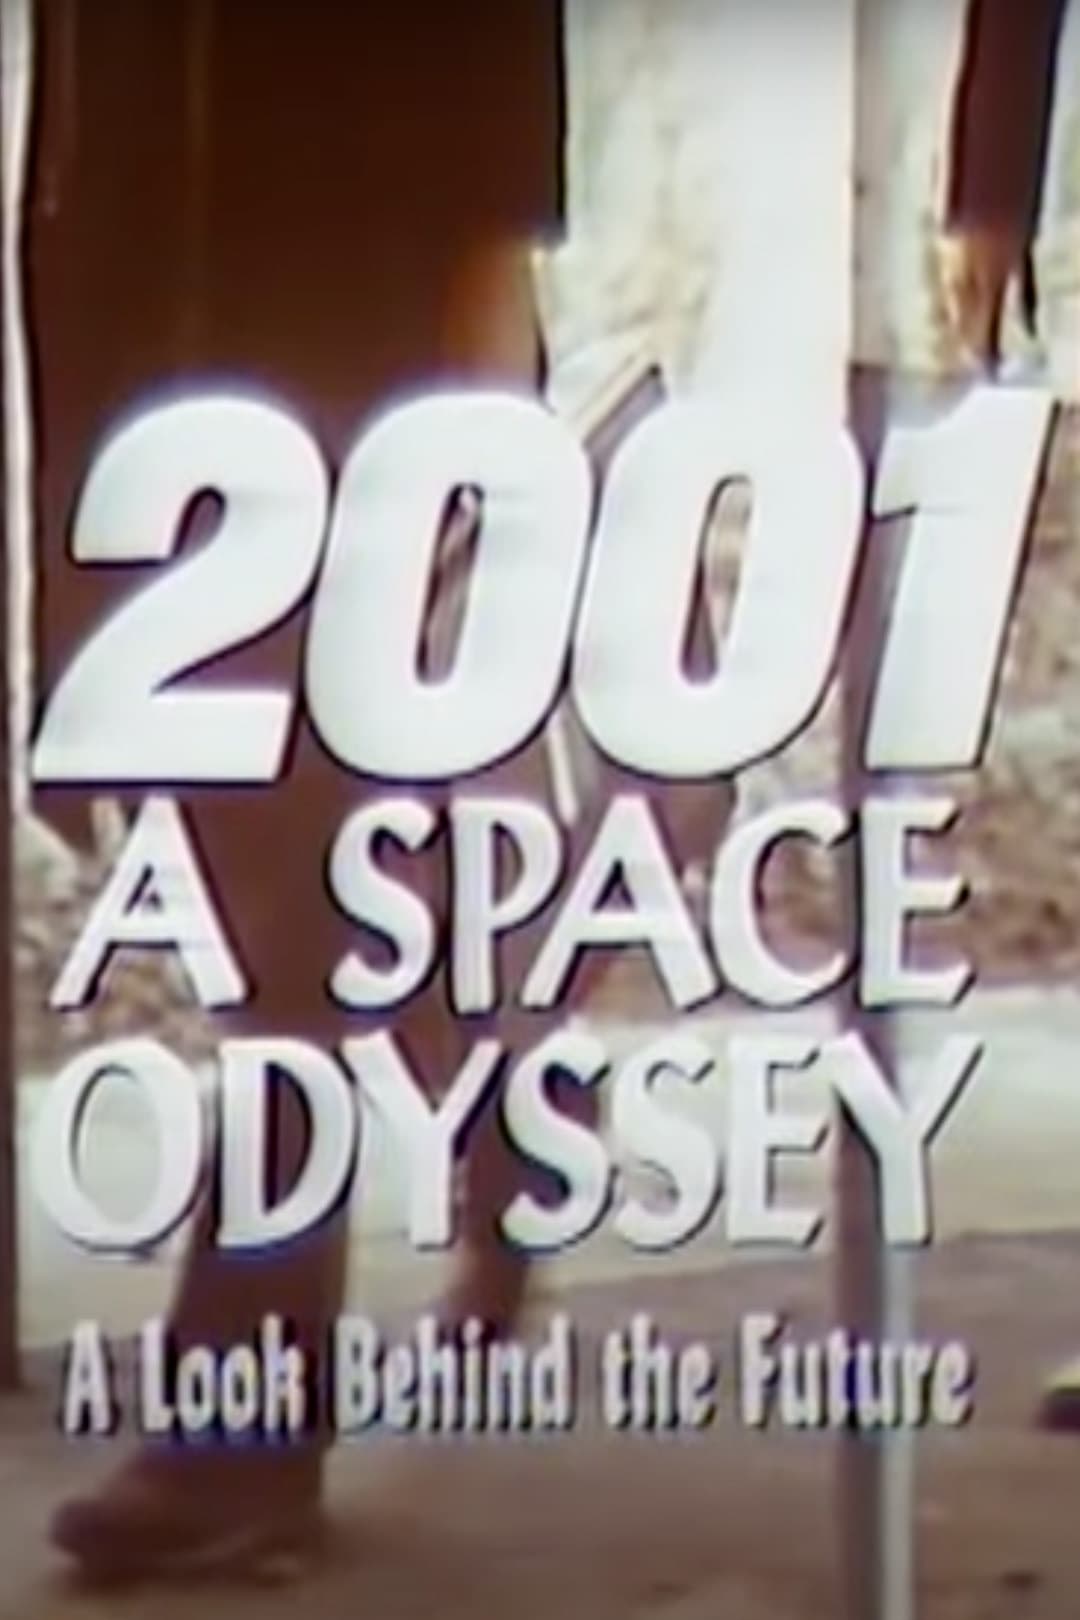 2001: A Space Odyssey – A Look Behind the Future (1966)